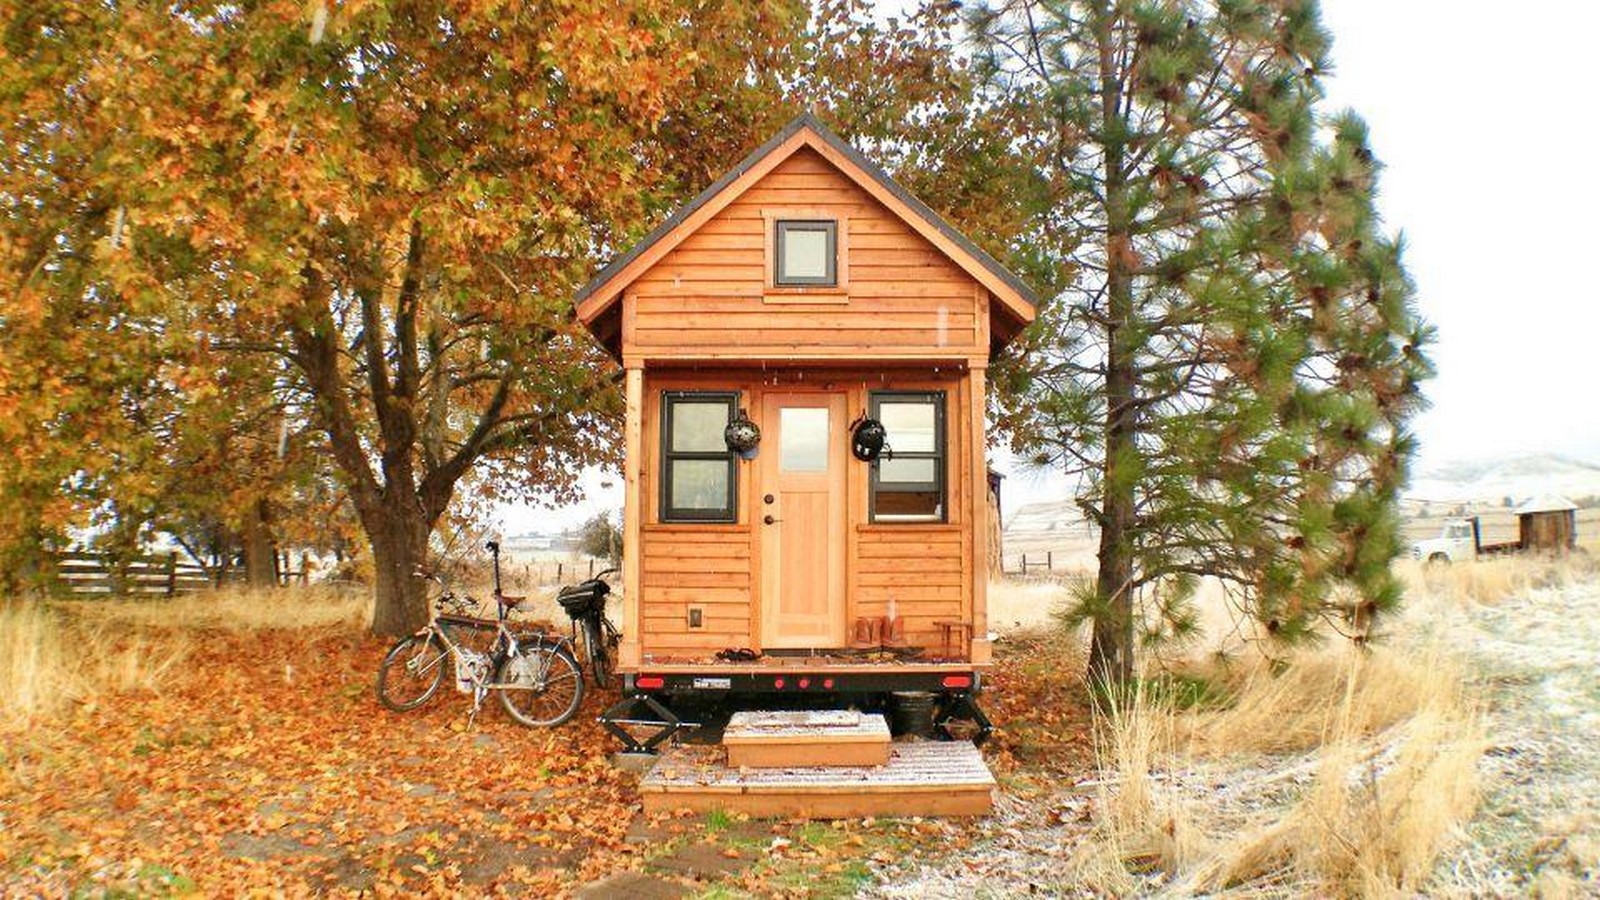 Will ‘Tiny House’ Concept be Beneficial in India? - Sheet1